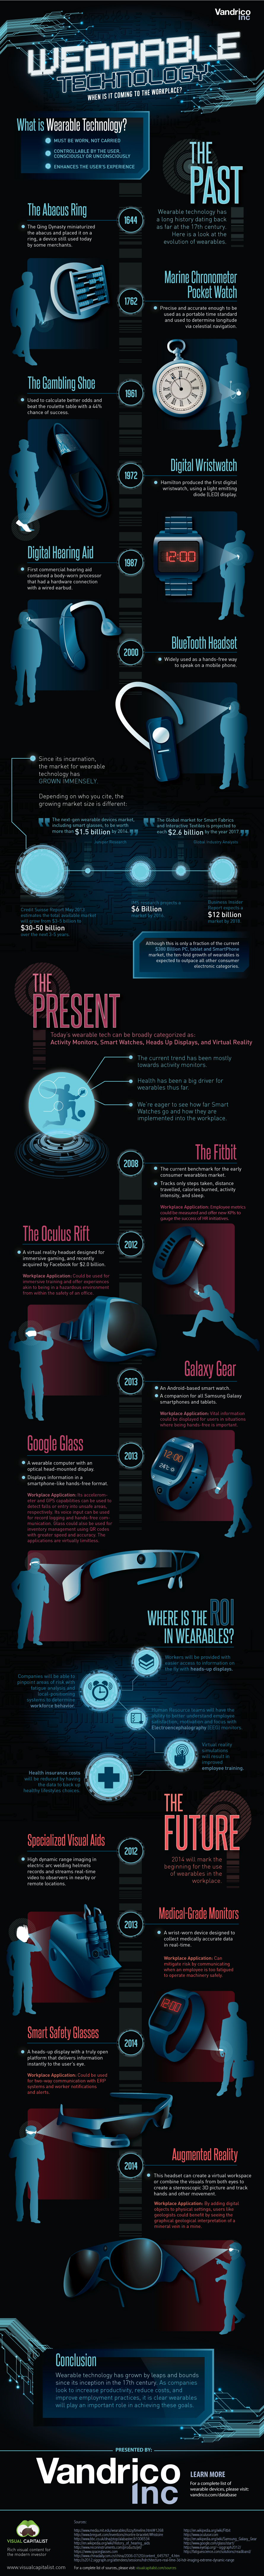 wearable-technology-infographic